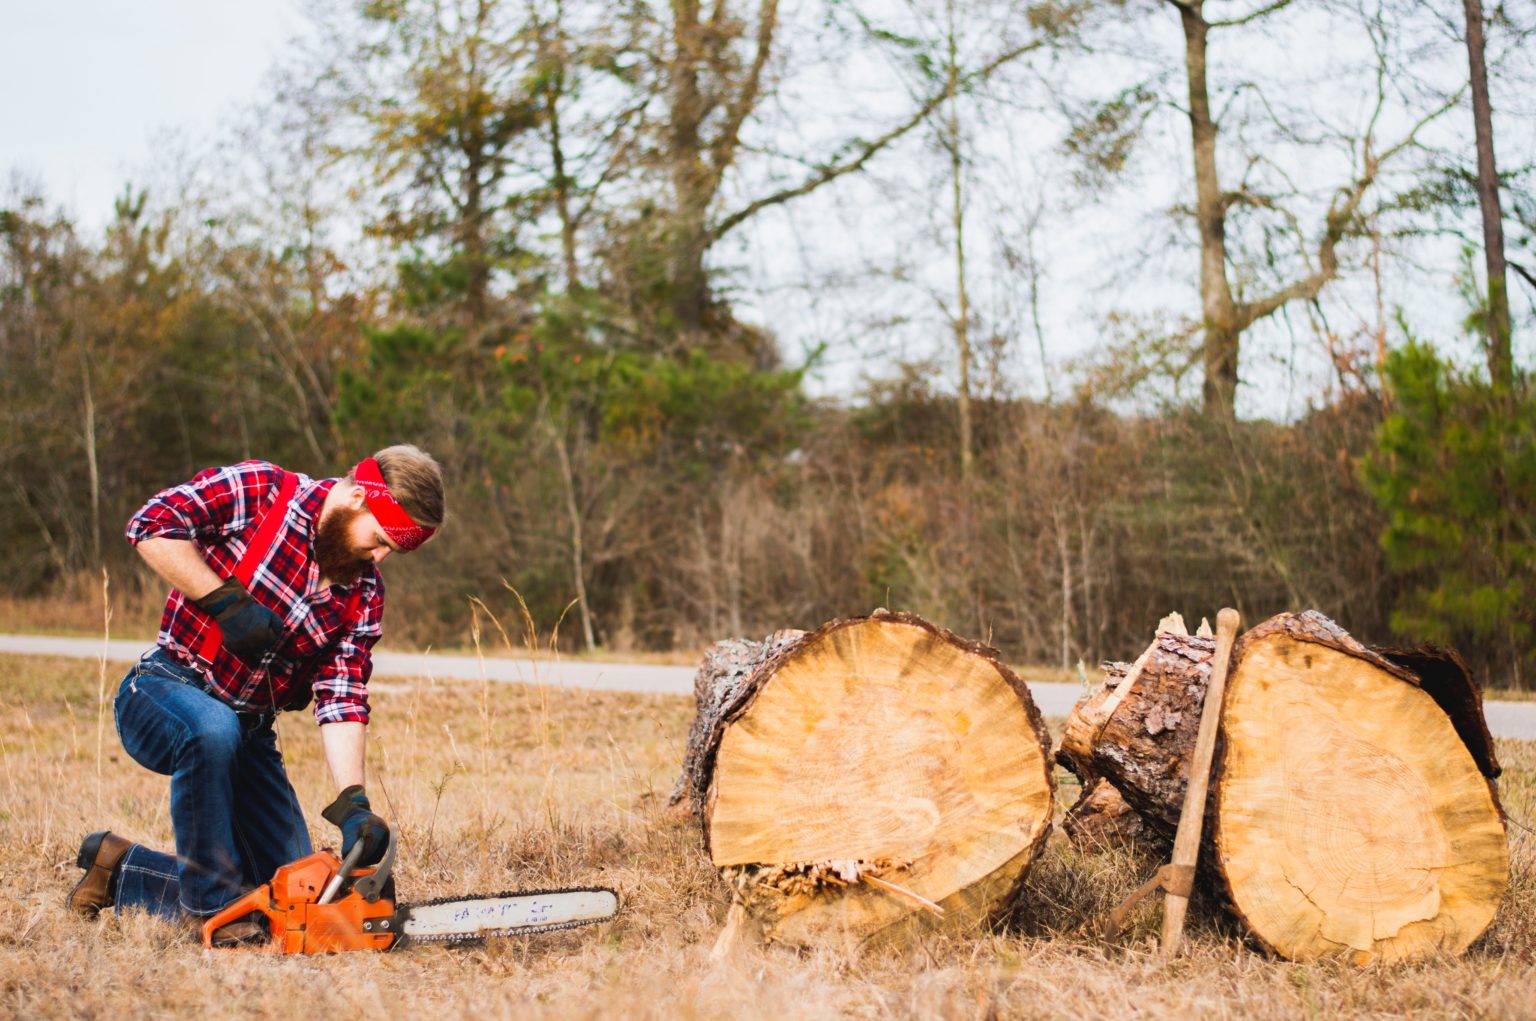 A man in a red plaid shirt kneels to start a chainsaw